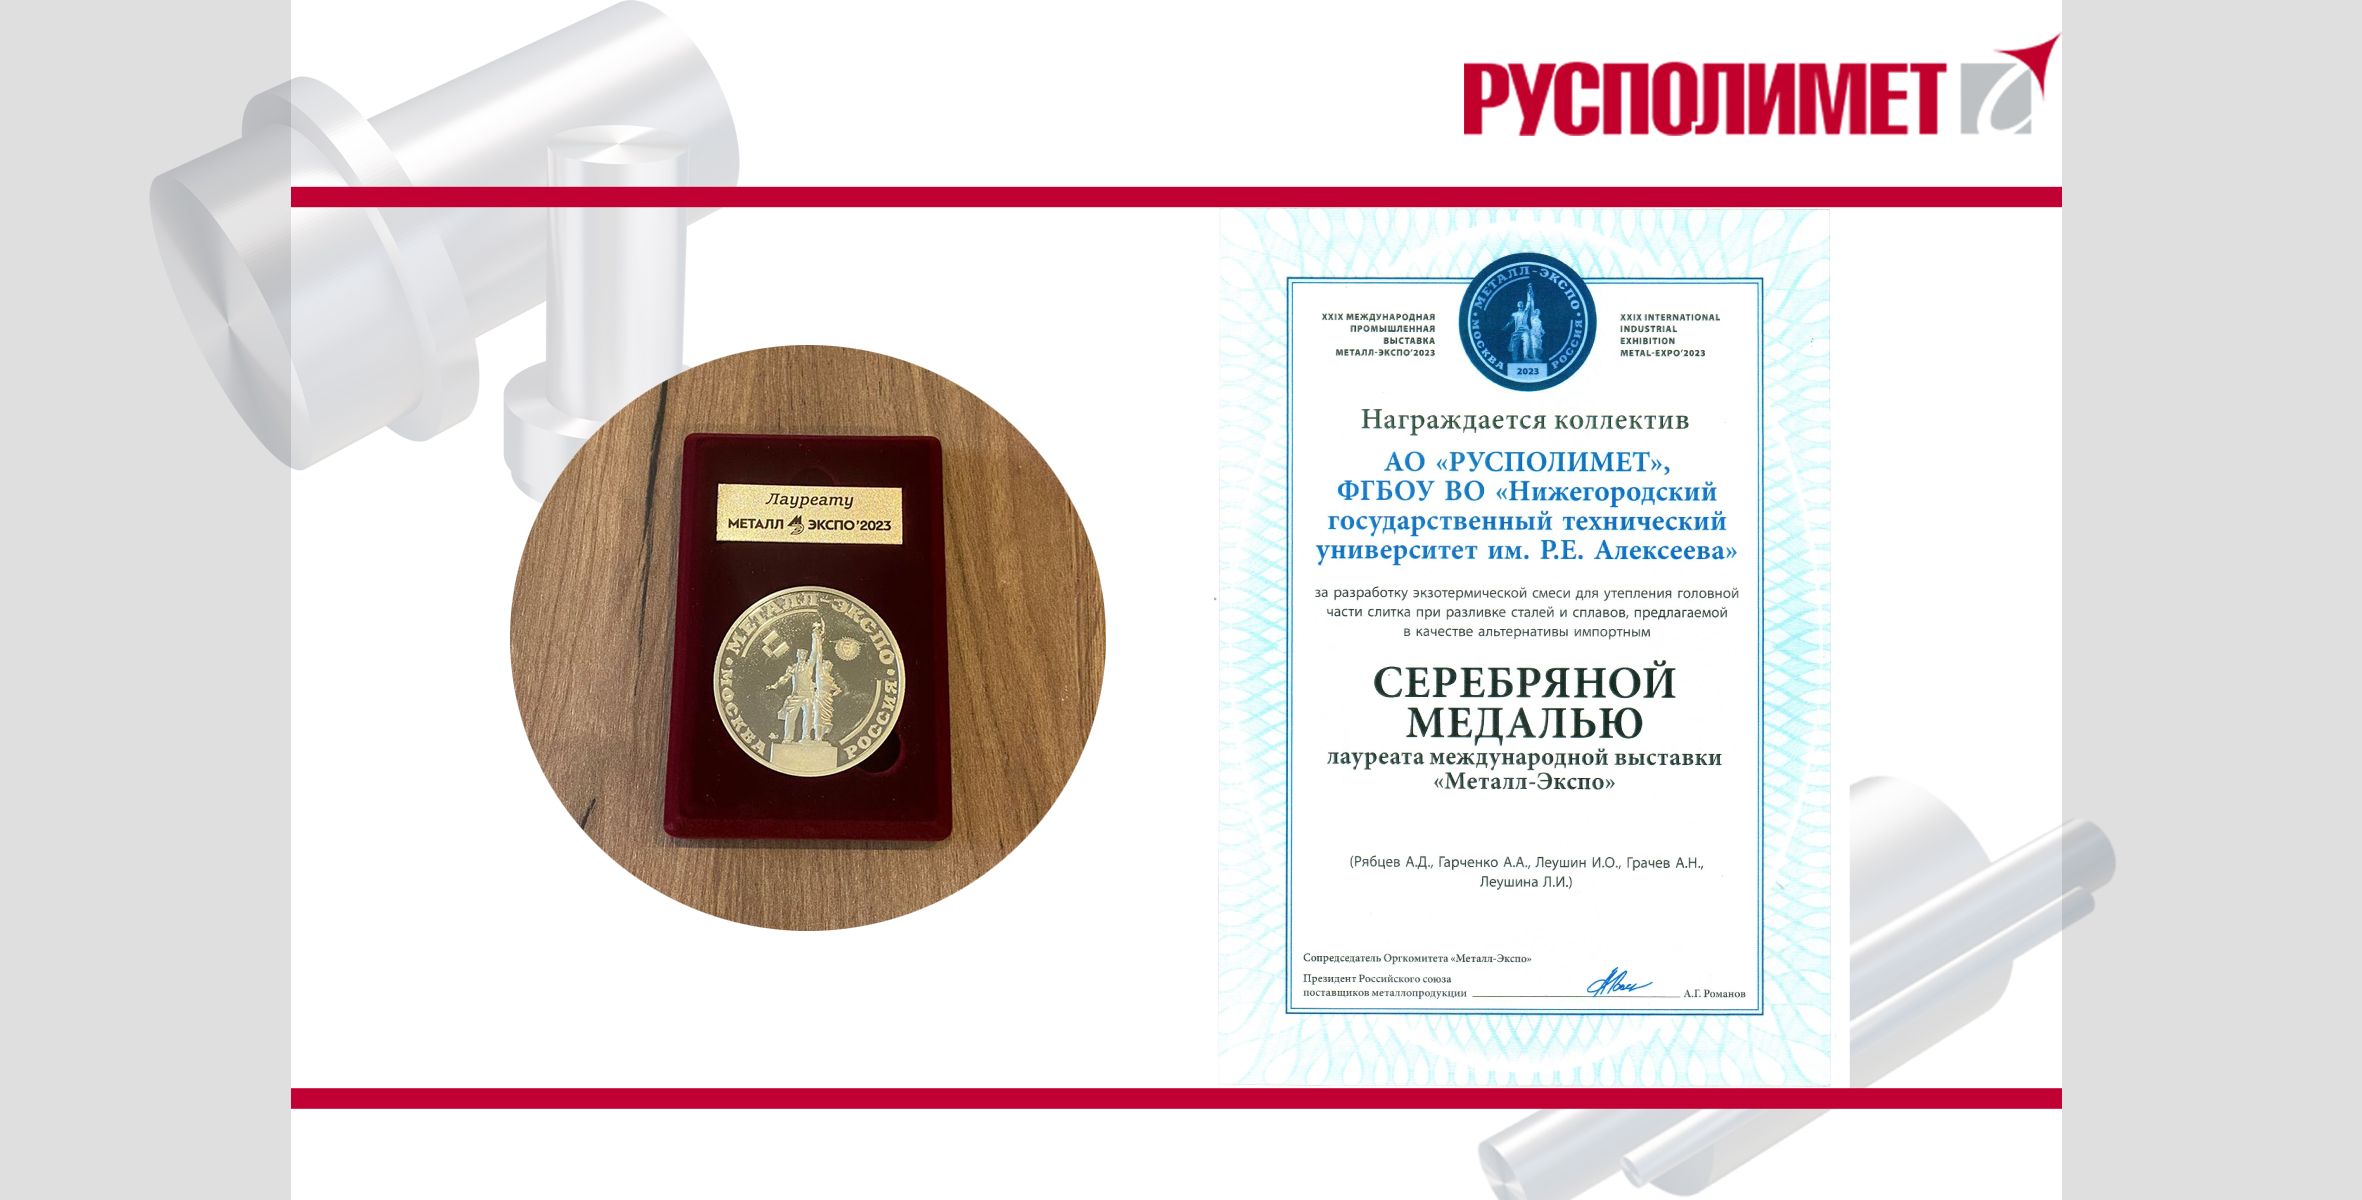 JSC "RUSPOLIMET" WAS AWARDED A SILVER MEDAL FOR JOINT RESEARCH WORK WITH NSTU NAMED AFTER R.E. ALEKSEEV